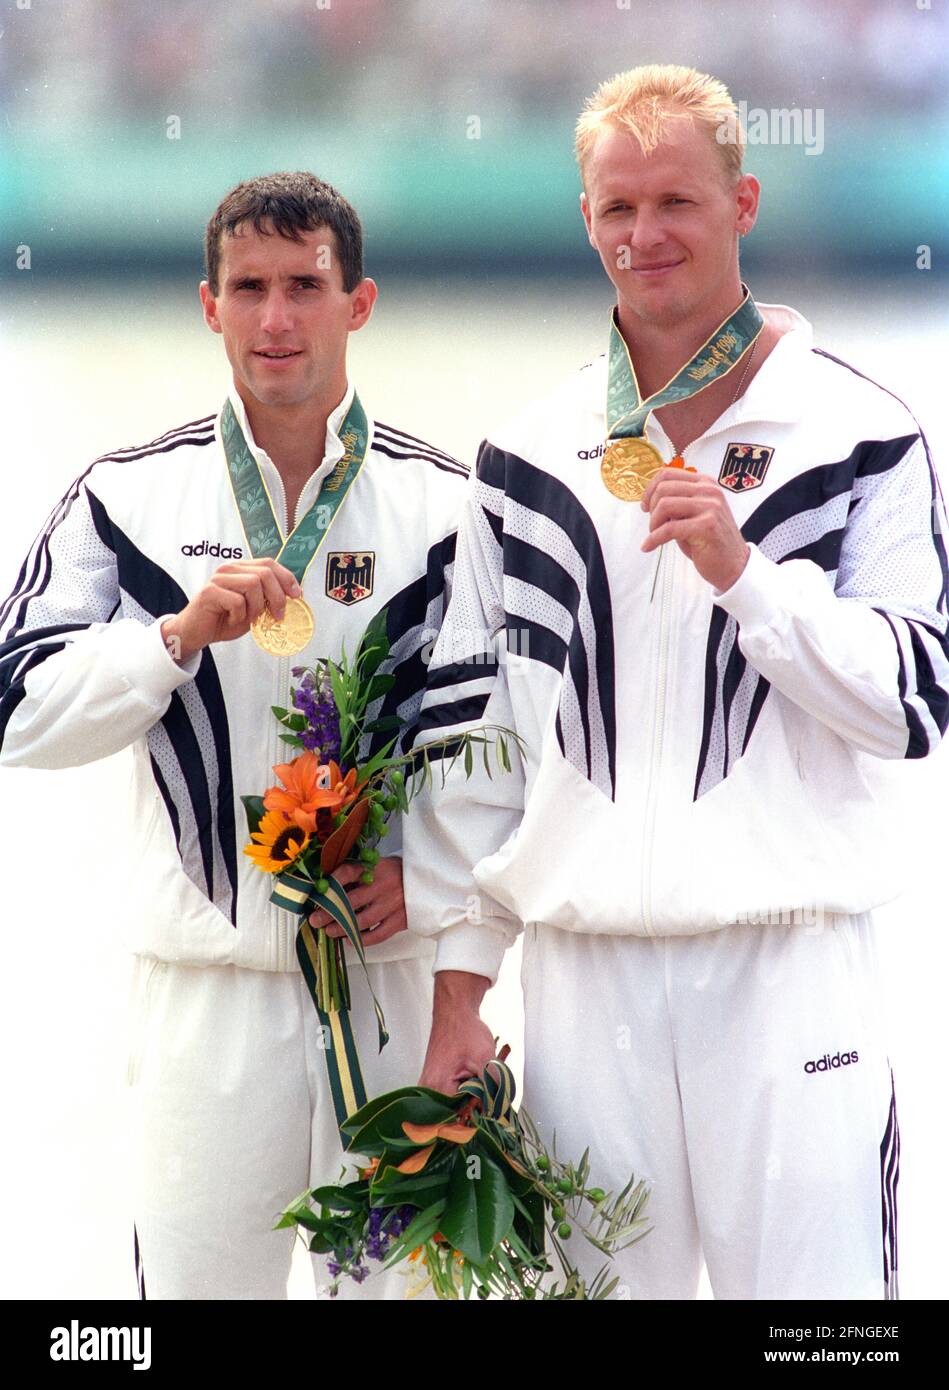 Olympic Games 1996 in Atlanta. Canoe 2er Kayak 500m The Olympic Champions Torsten Gutsche and Kay Bluhm (right) at the award ceremony , show their gold medals 04.08.1996 [automated translation] Stock Photo